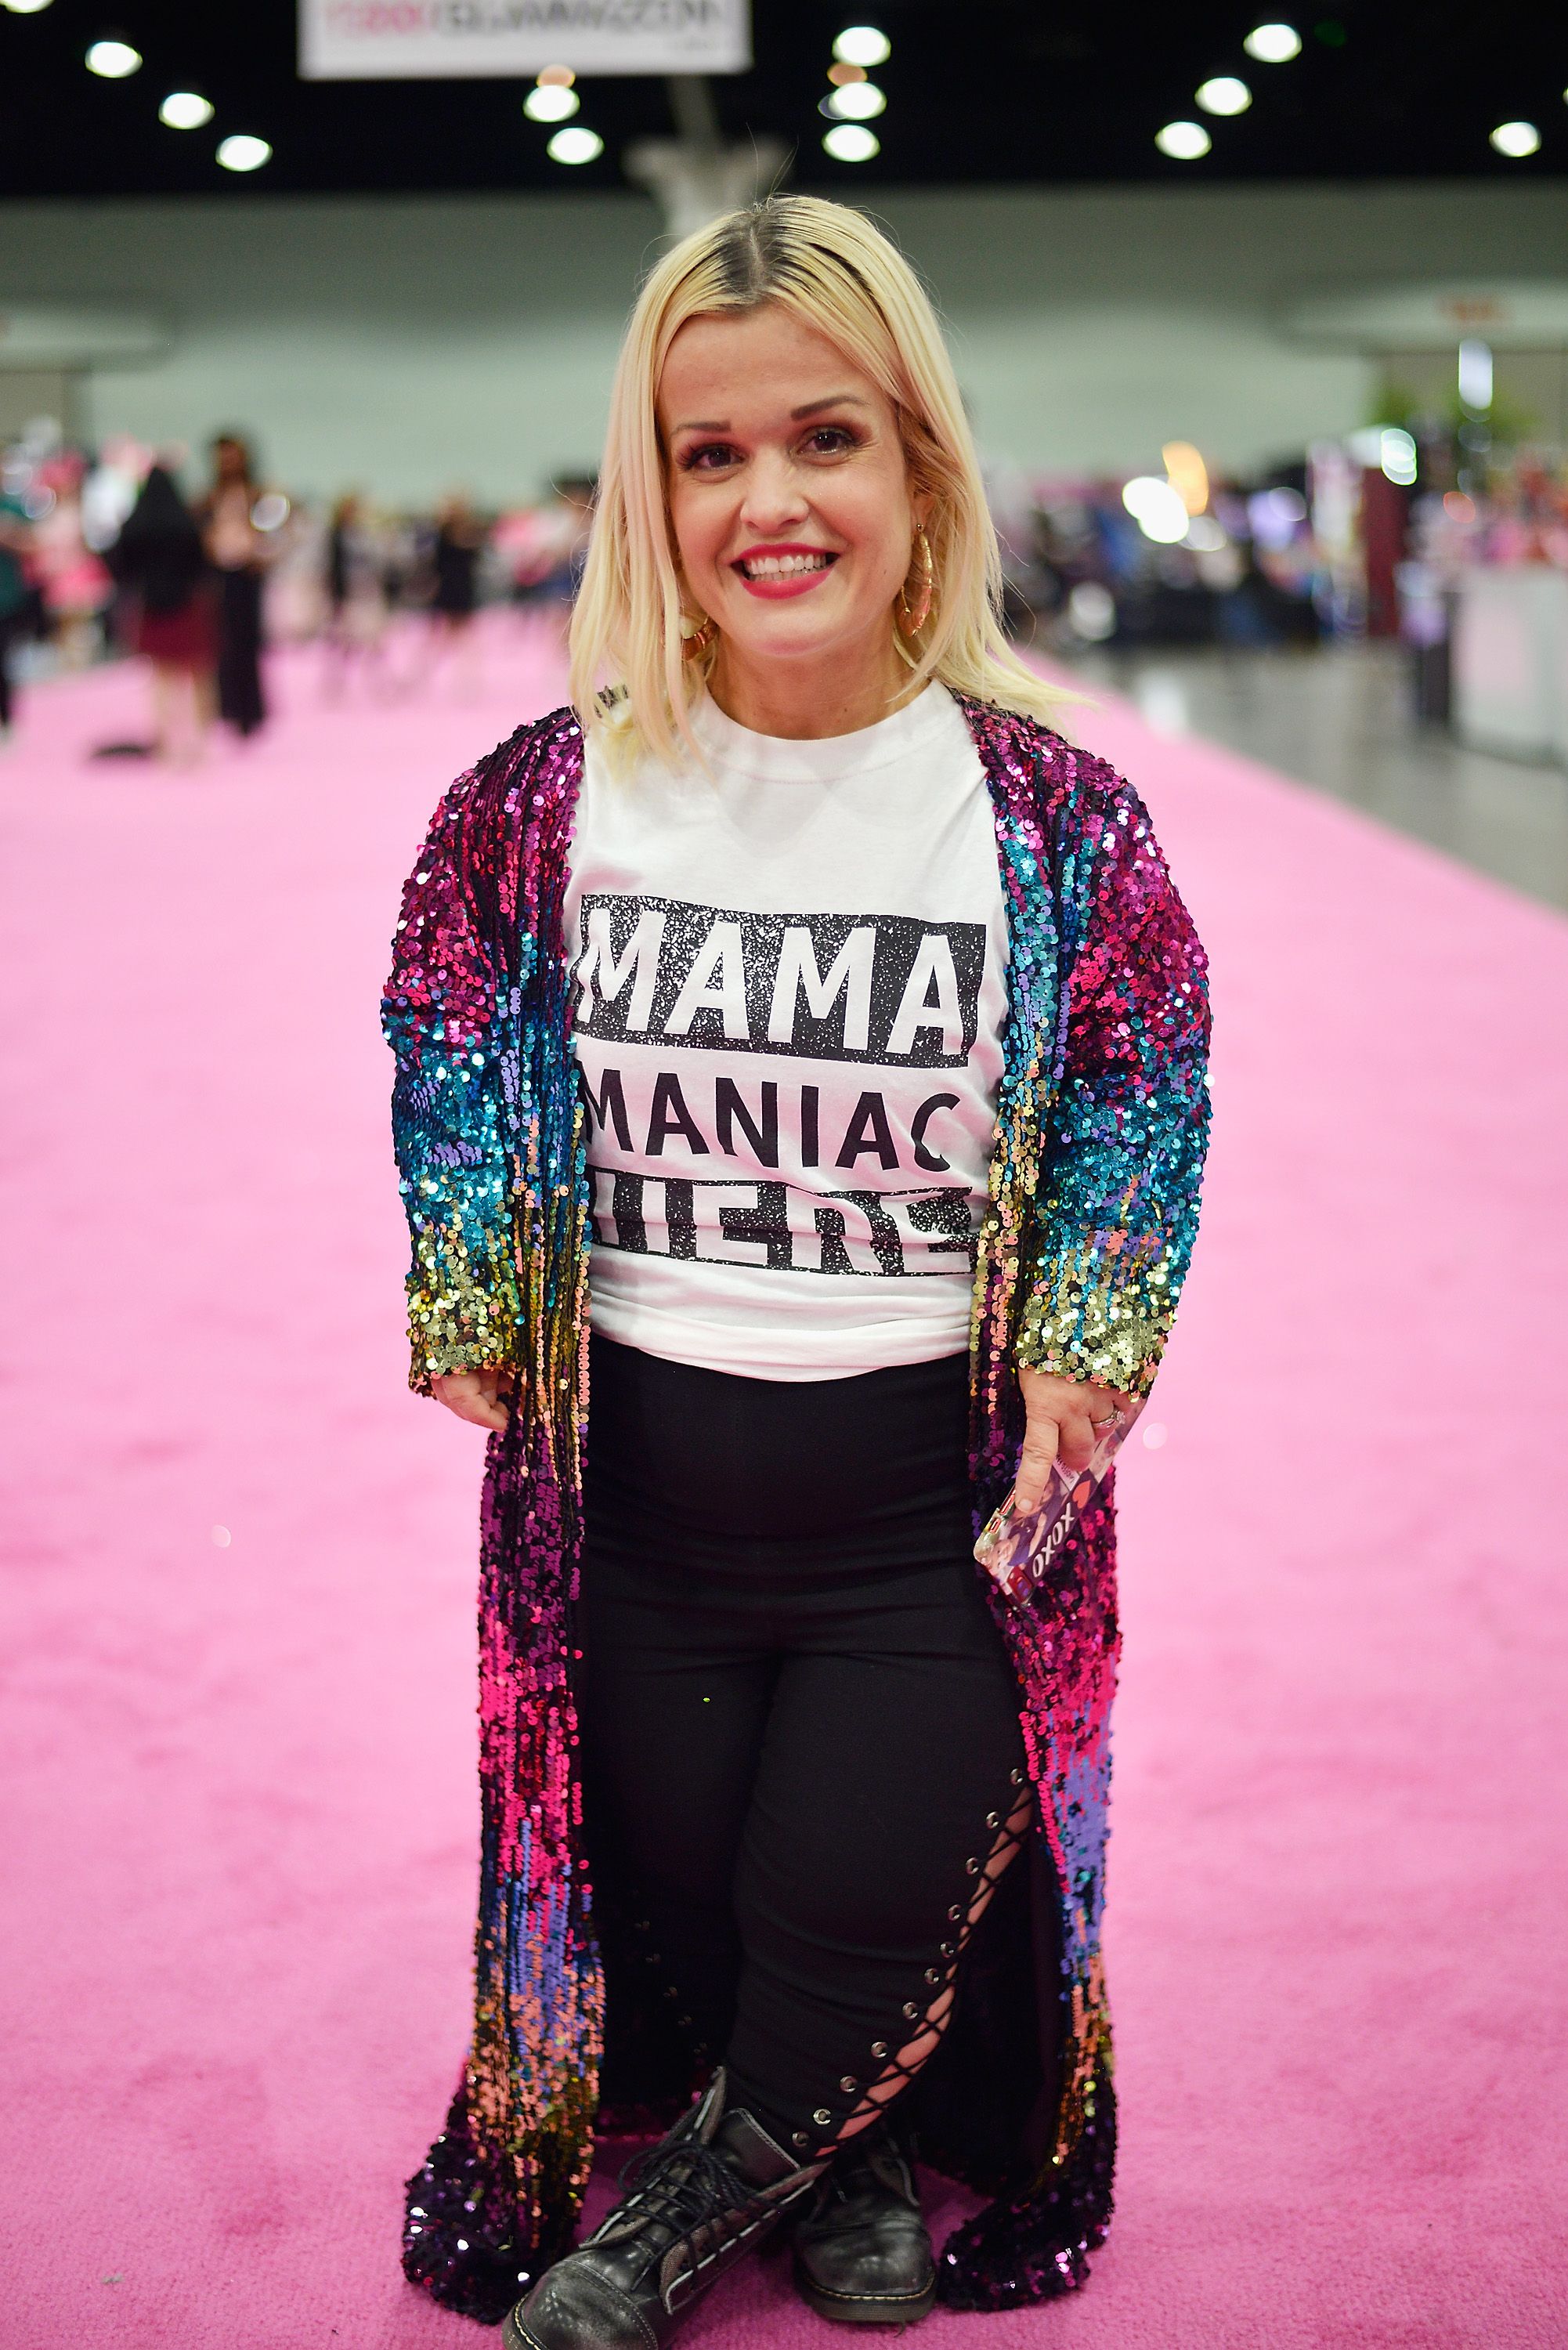 Terra Jole at 4th Annual RuPaul's DragCon at Los Angeles Convention Center on May 13, 2018. | Photo: Getty Images